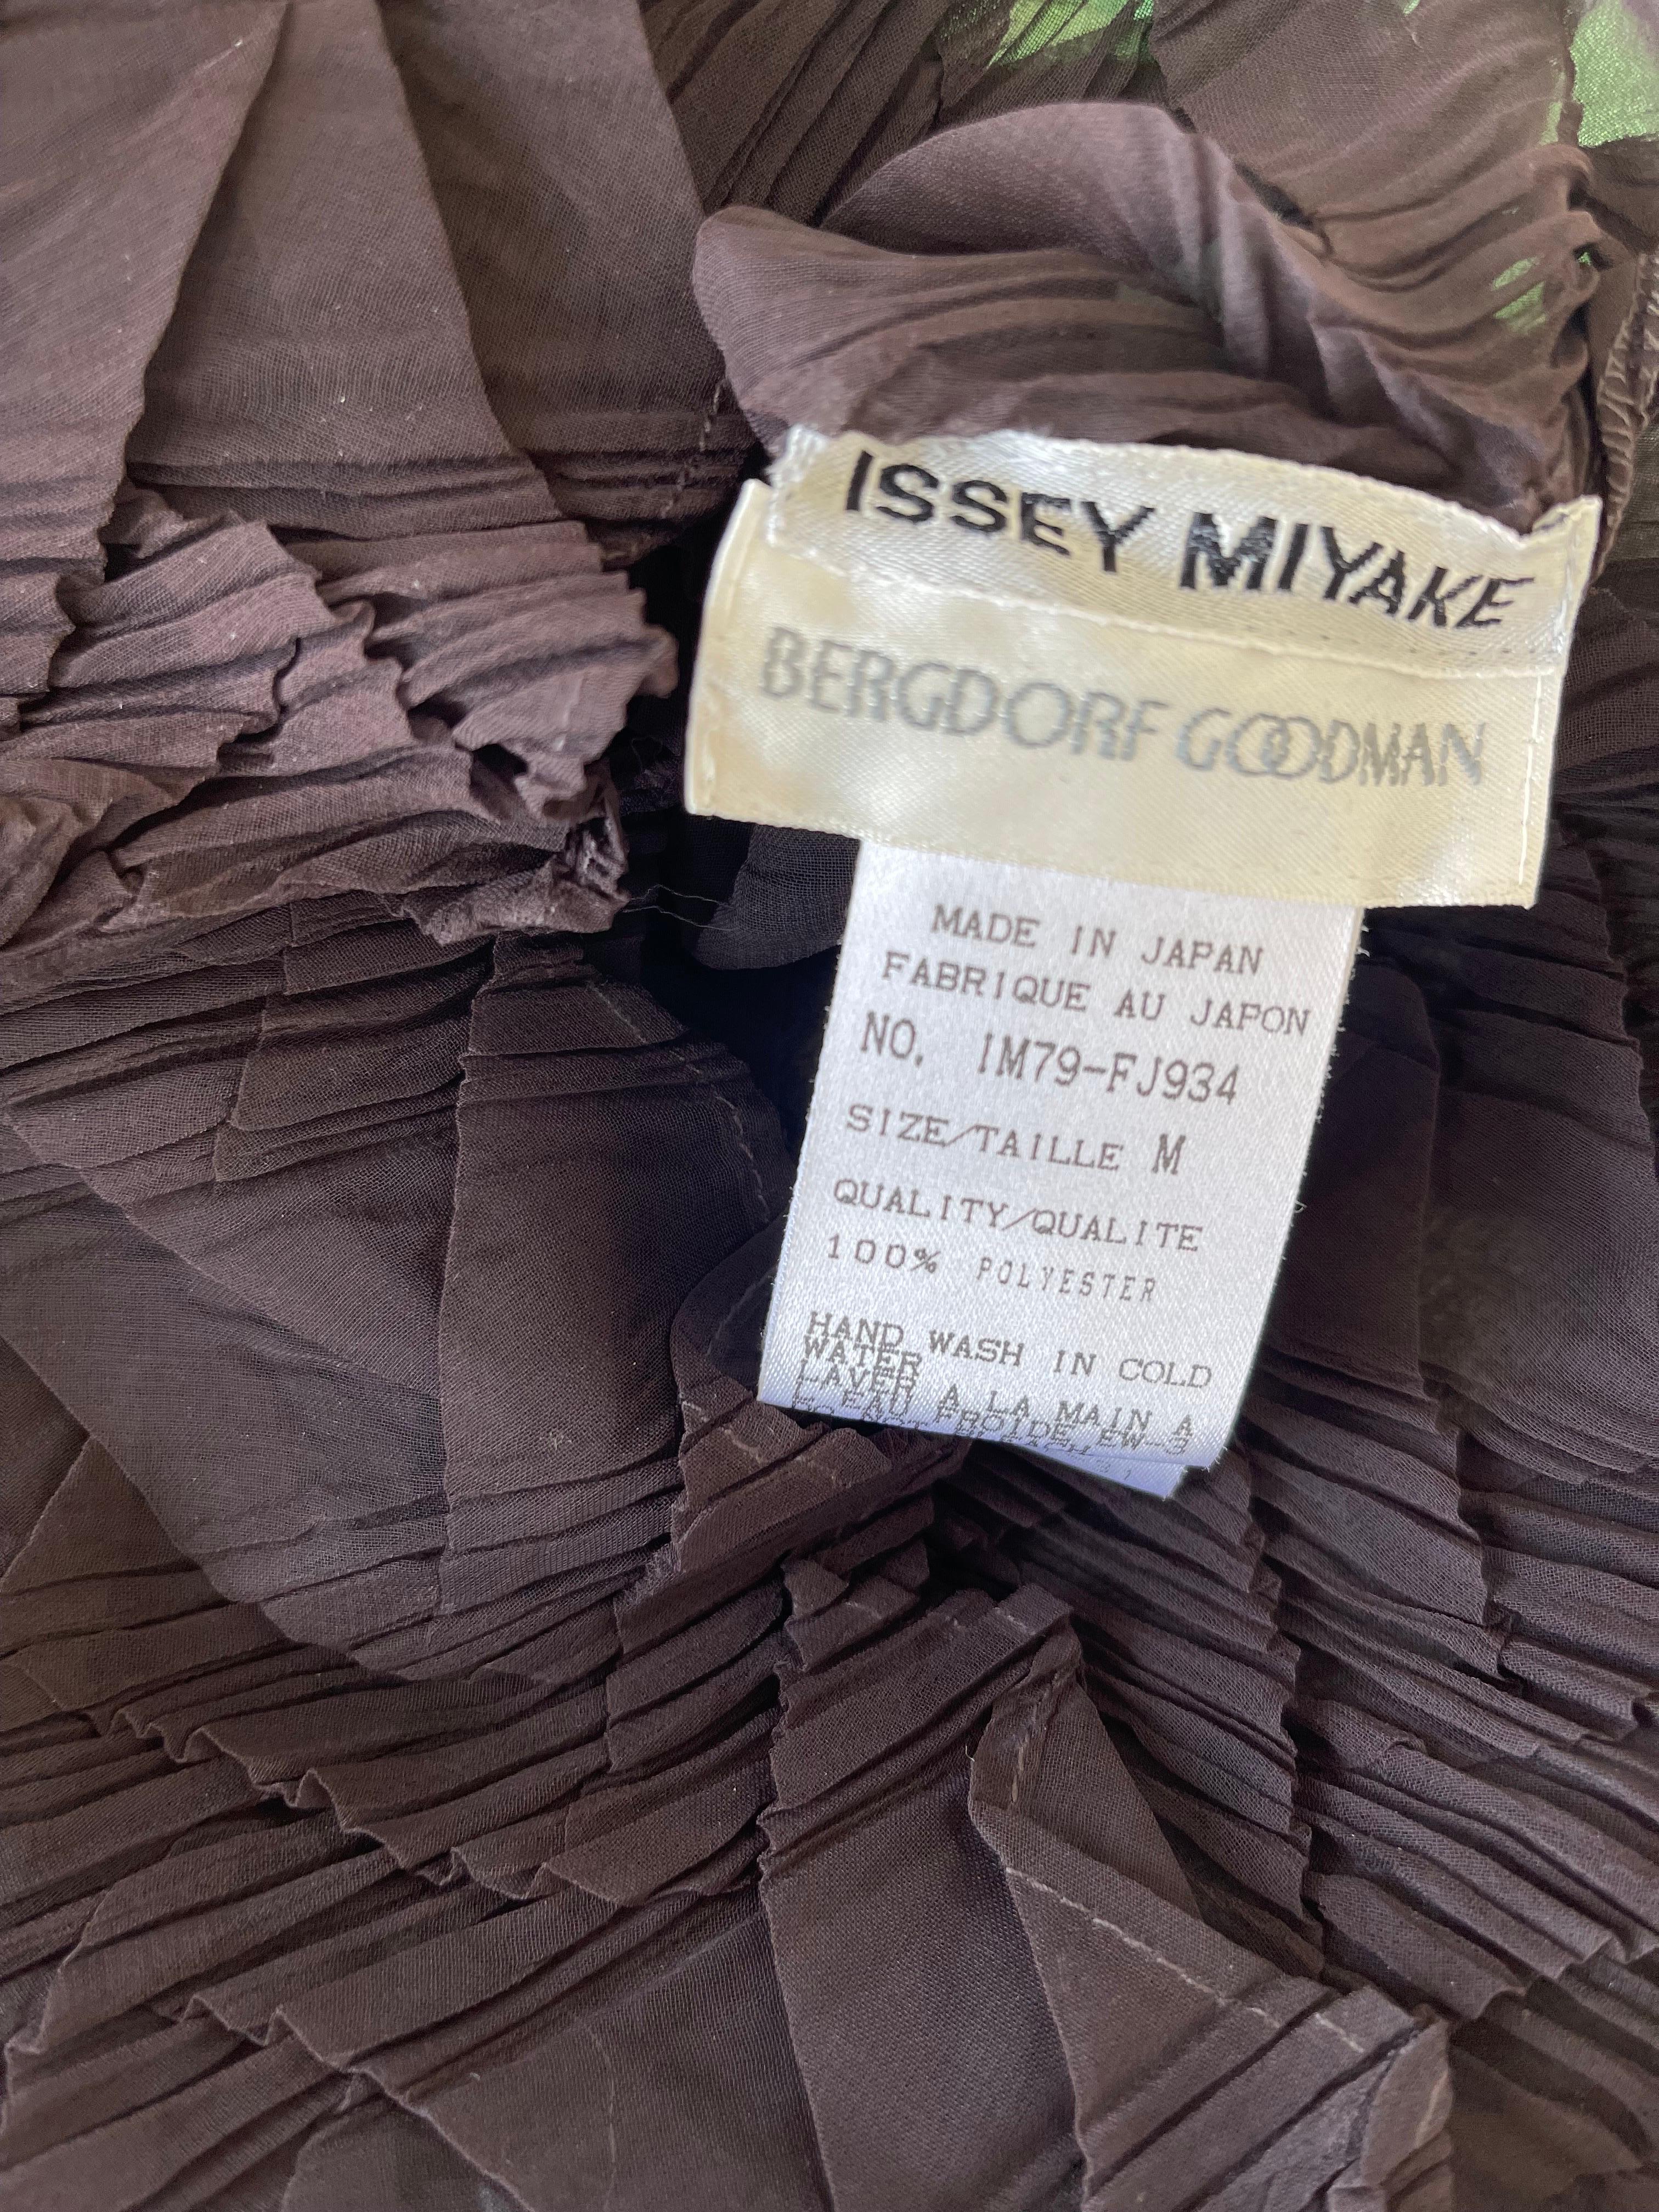 Chic vintage 90s Issey Miyake for Bergdorf Goodman chocolate brown sheer pleated shirt ! Buttons up the front (but, can be reversed to button up the back). Unique crinkle pleats throughout. Packs easy, and does not wrinkle. Can easily be dressed up